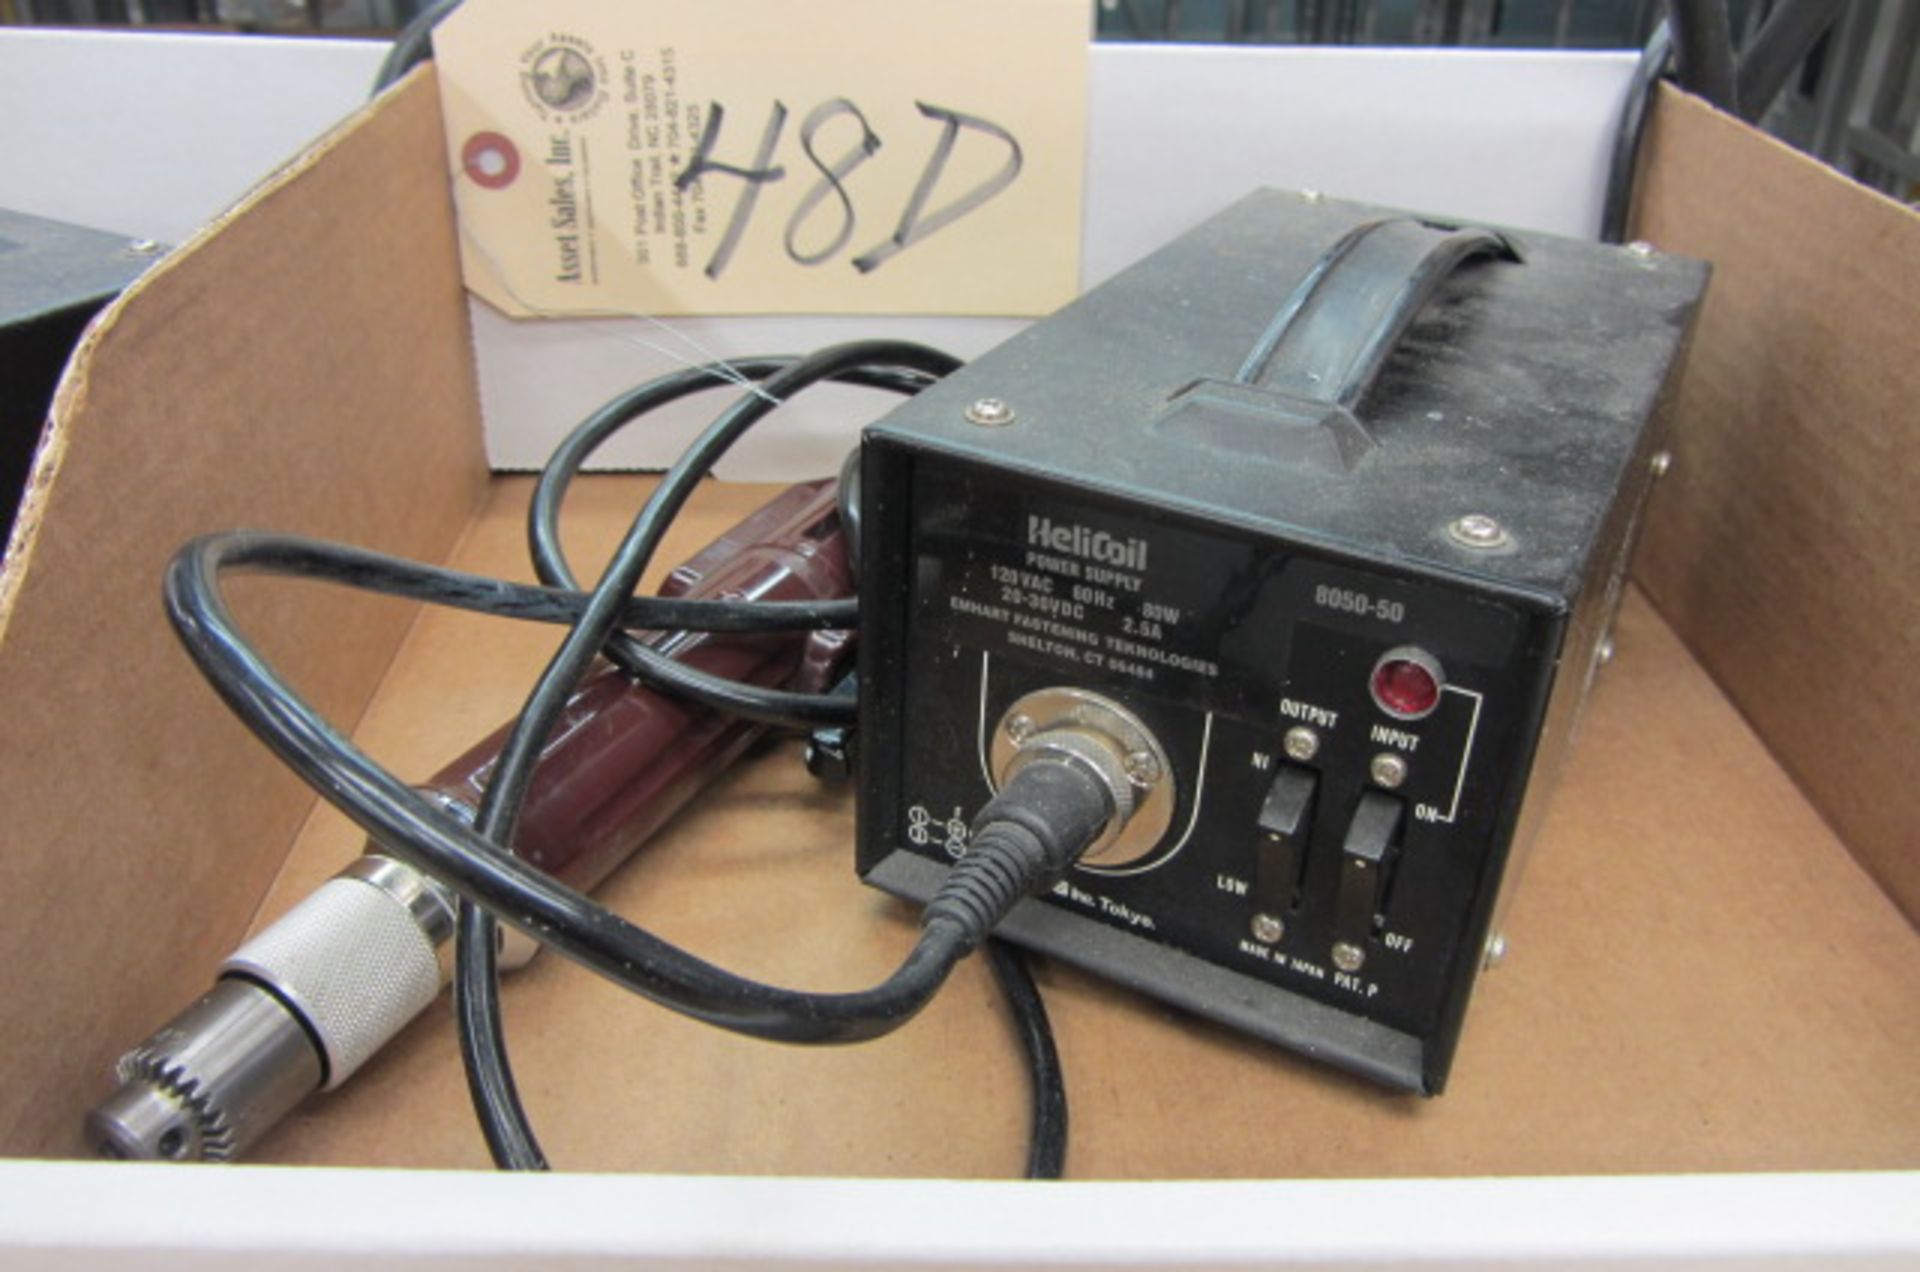 Heli-Coil 8050-50 Power Supply & Tool